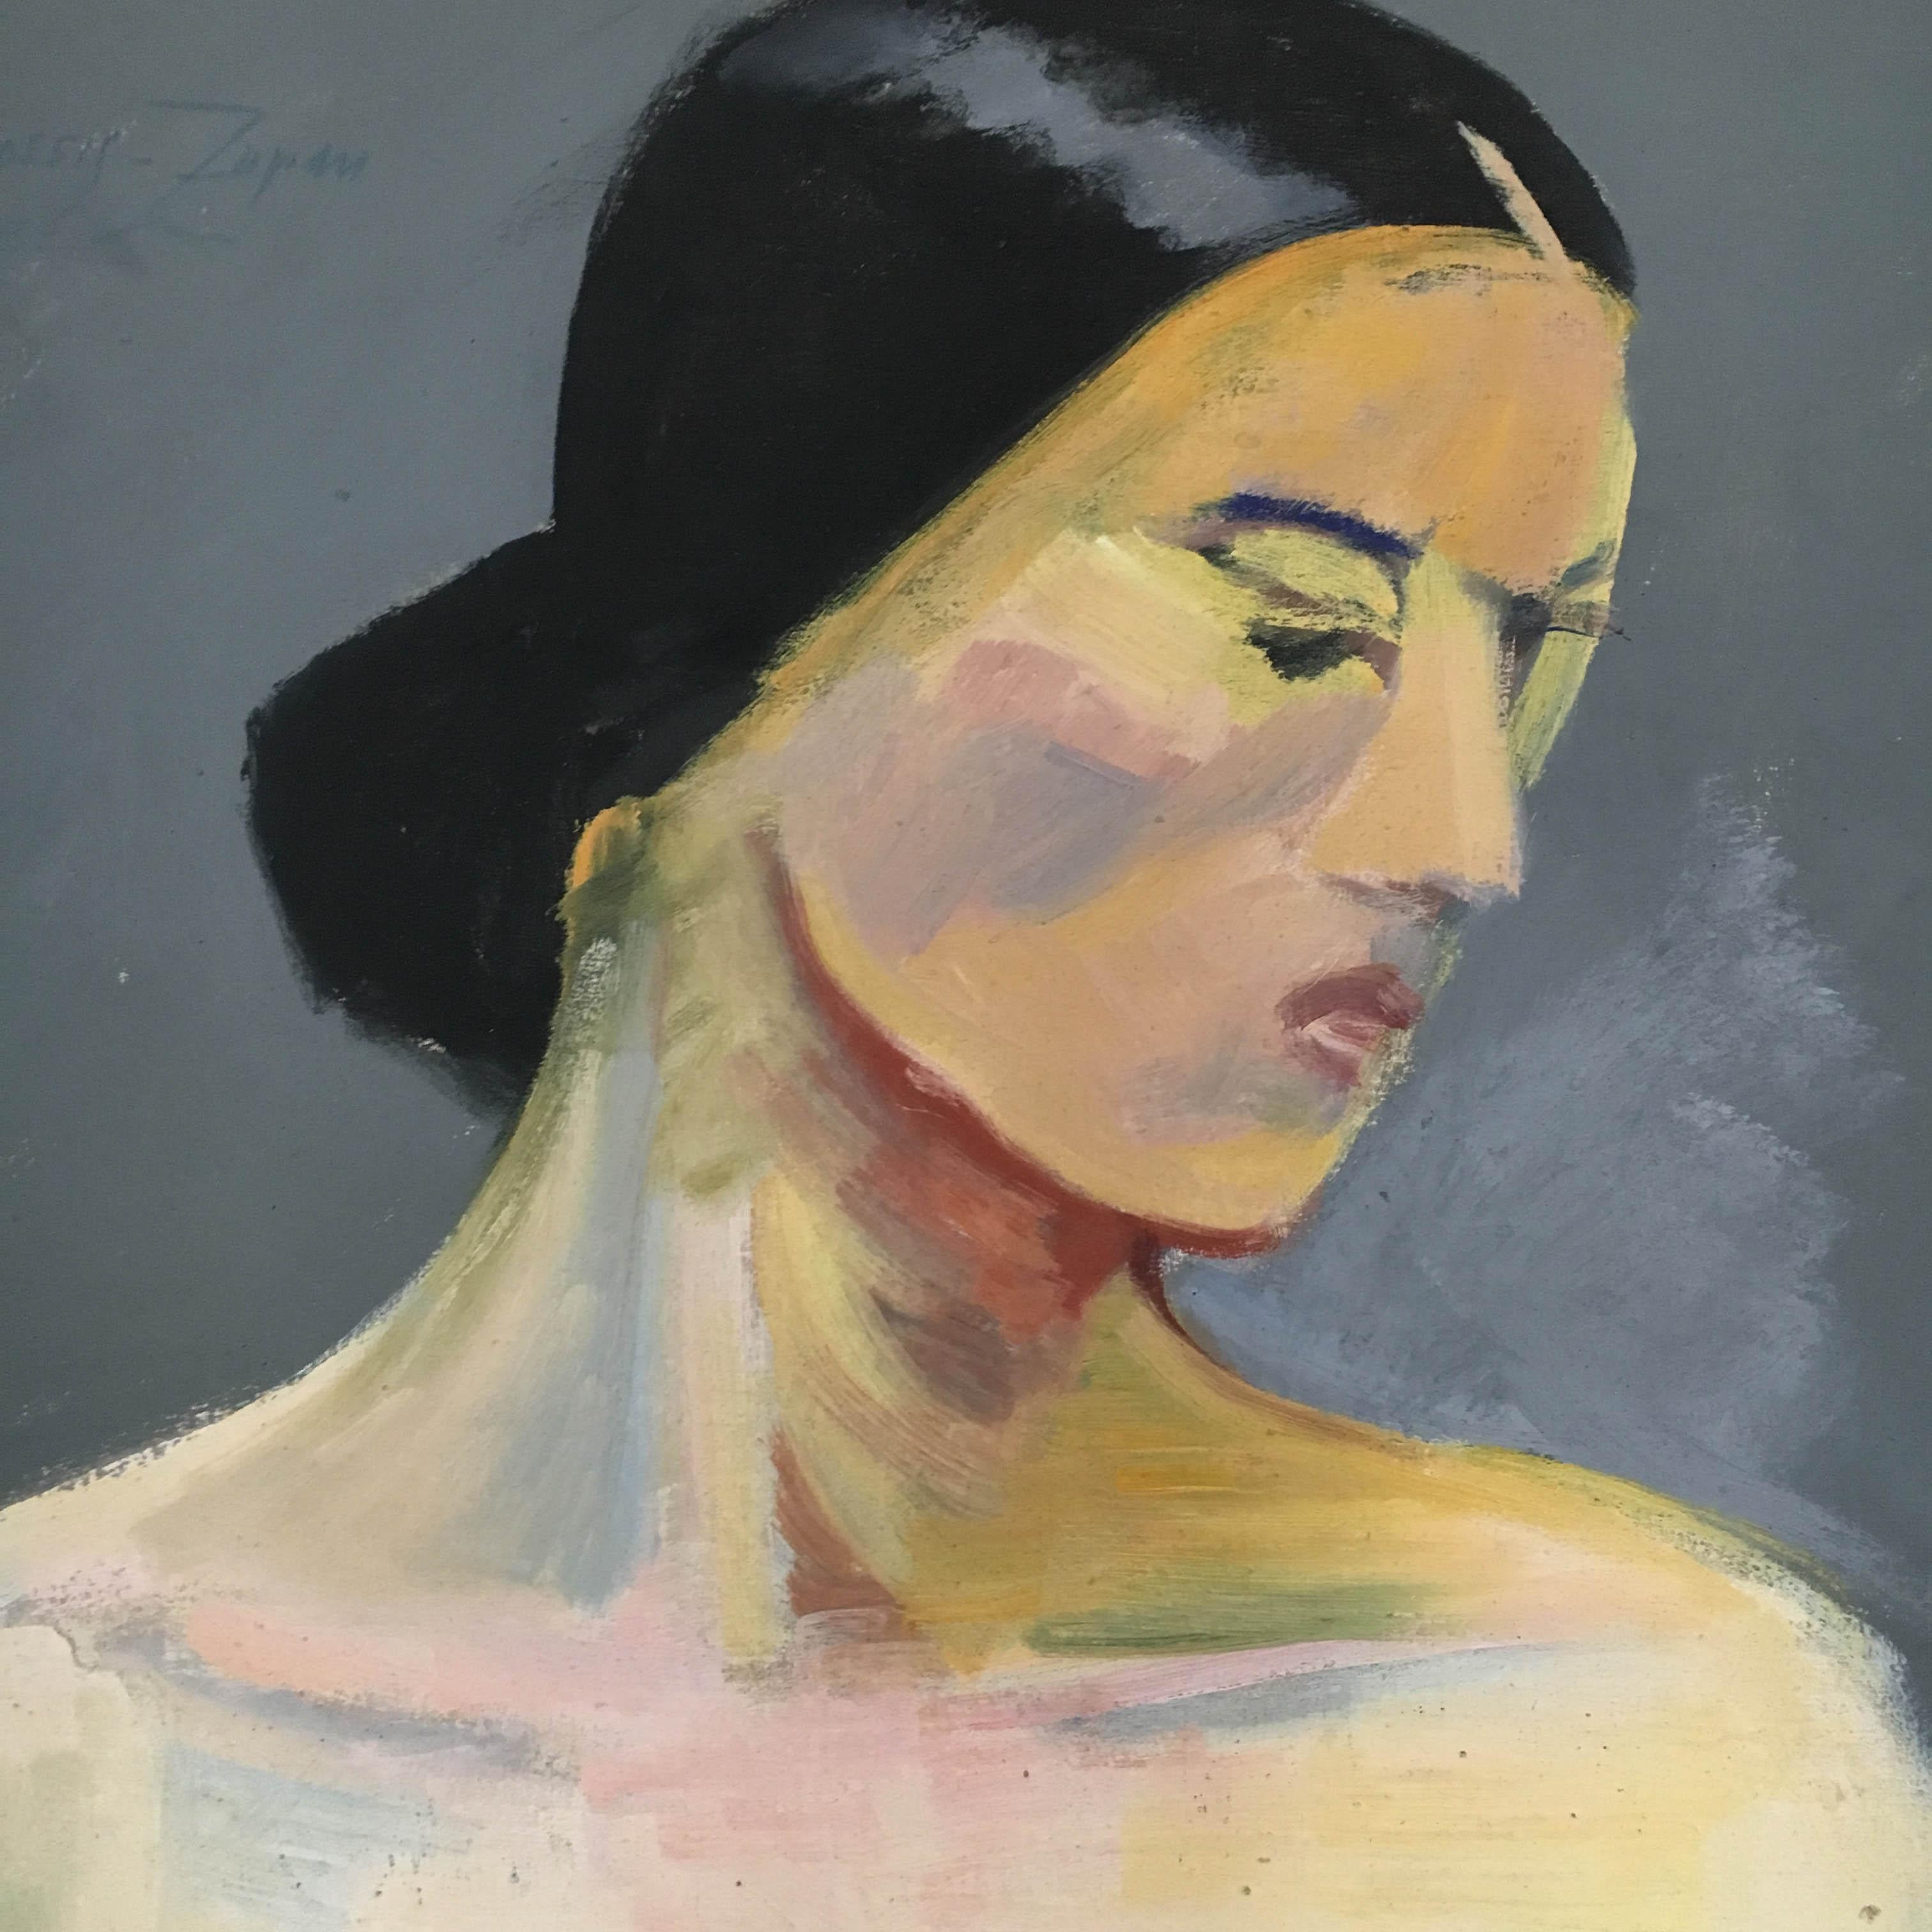 Mid-20th Century 1933 Female Nude Portrait Study Oil Painting by Olga von Mossig-Zupan For Sale